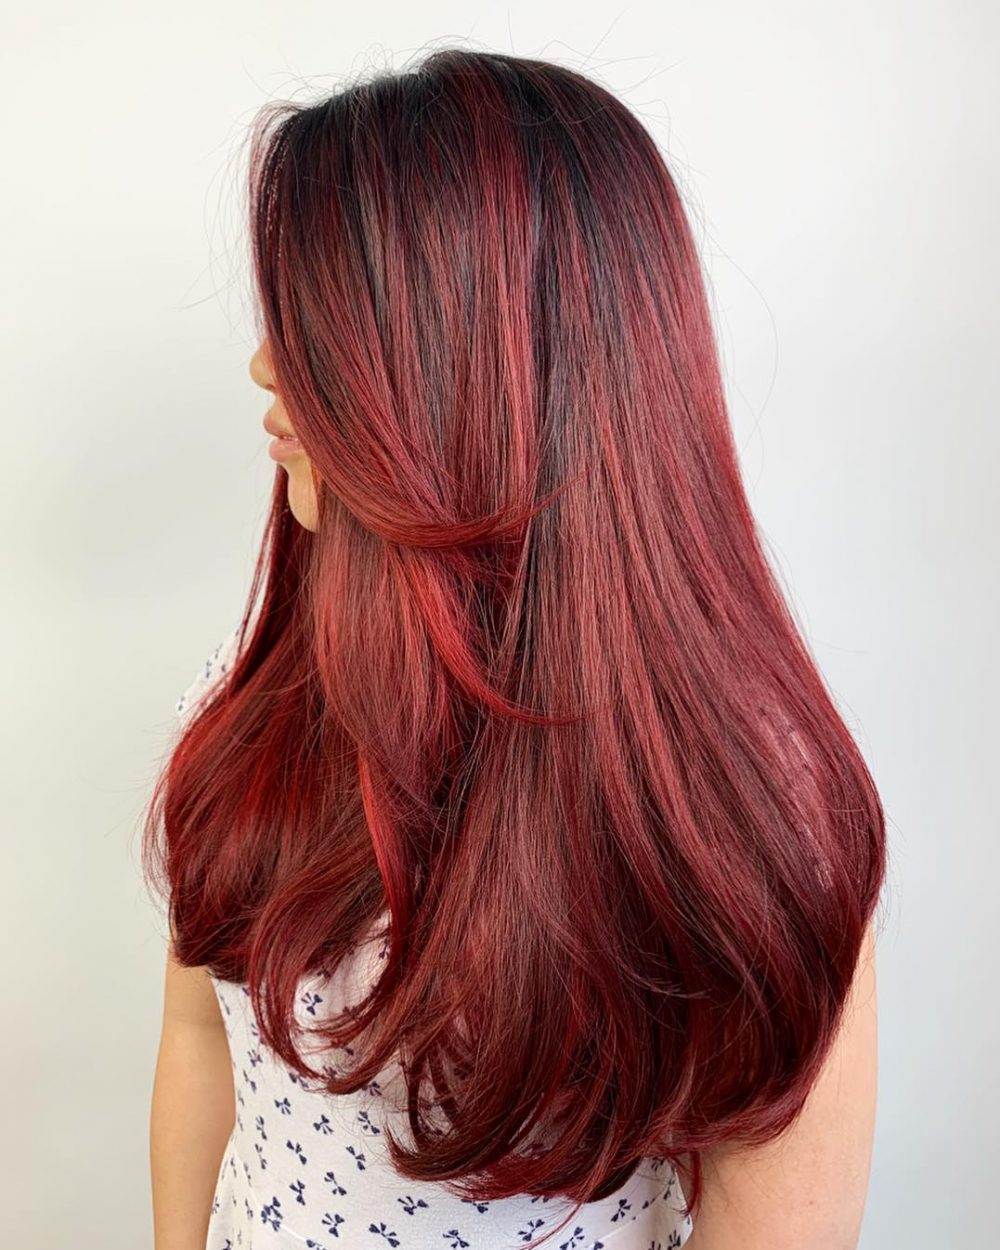 Vibrant Long Red Hair with Long Side Bangs